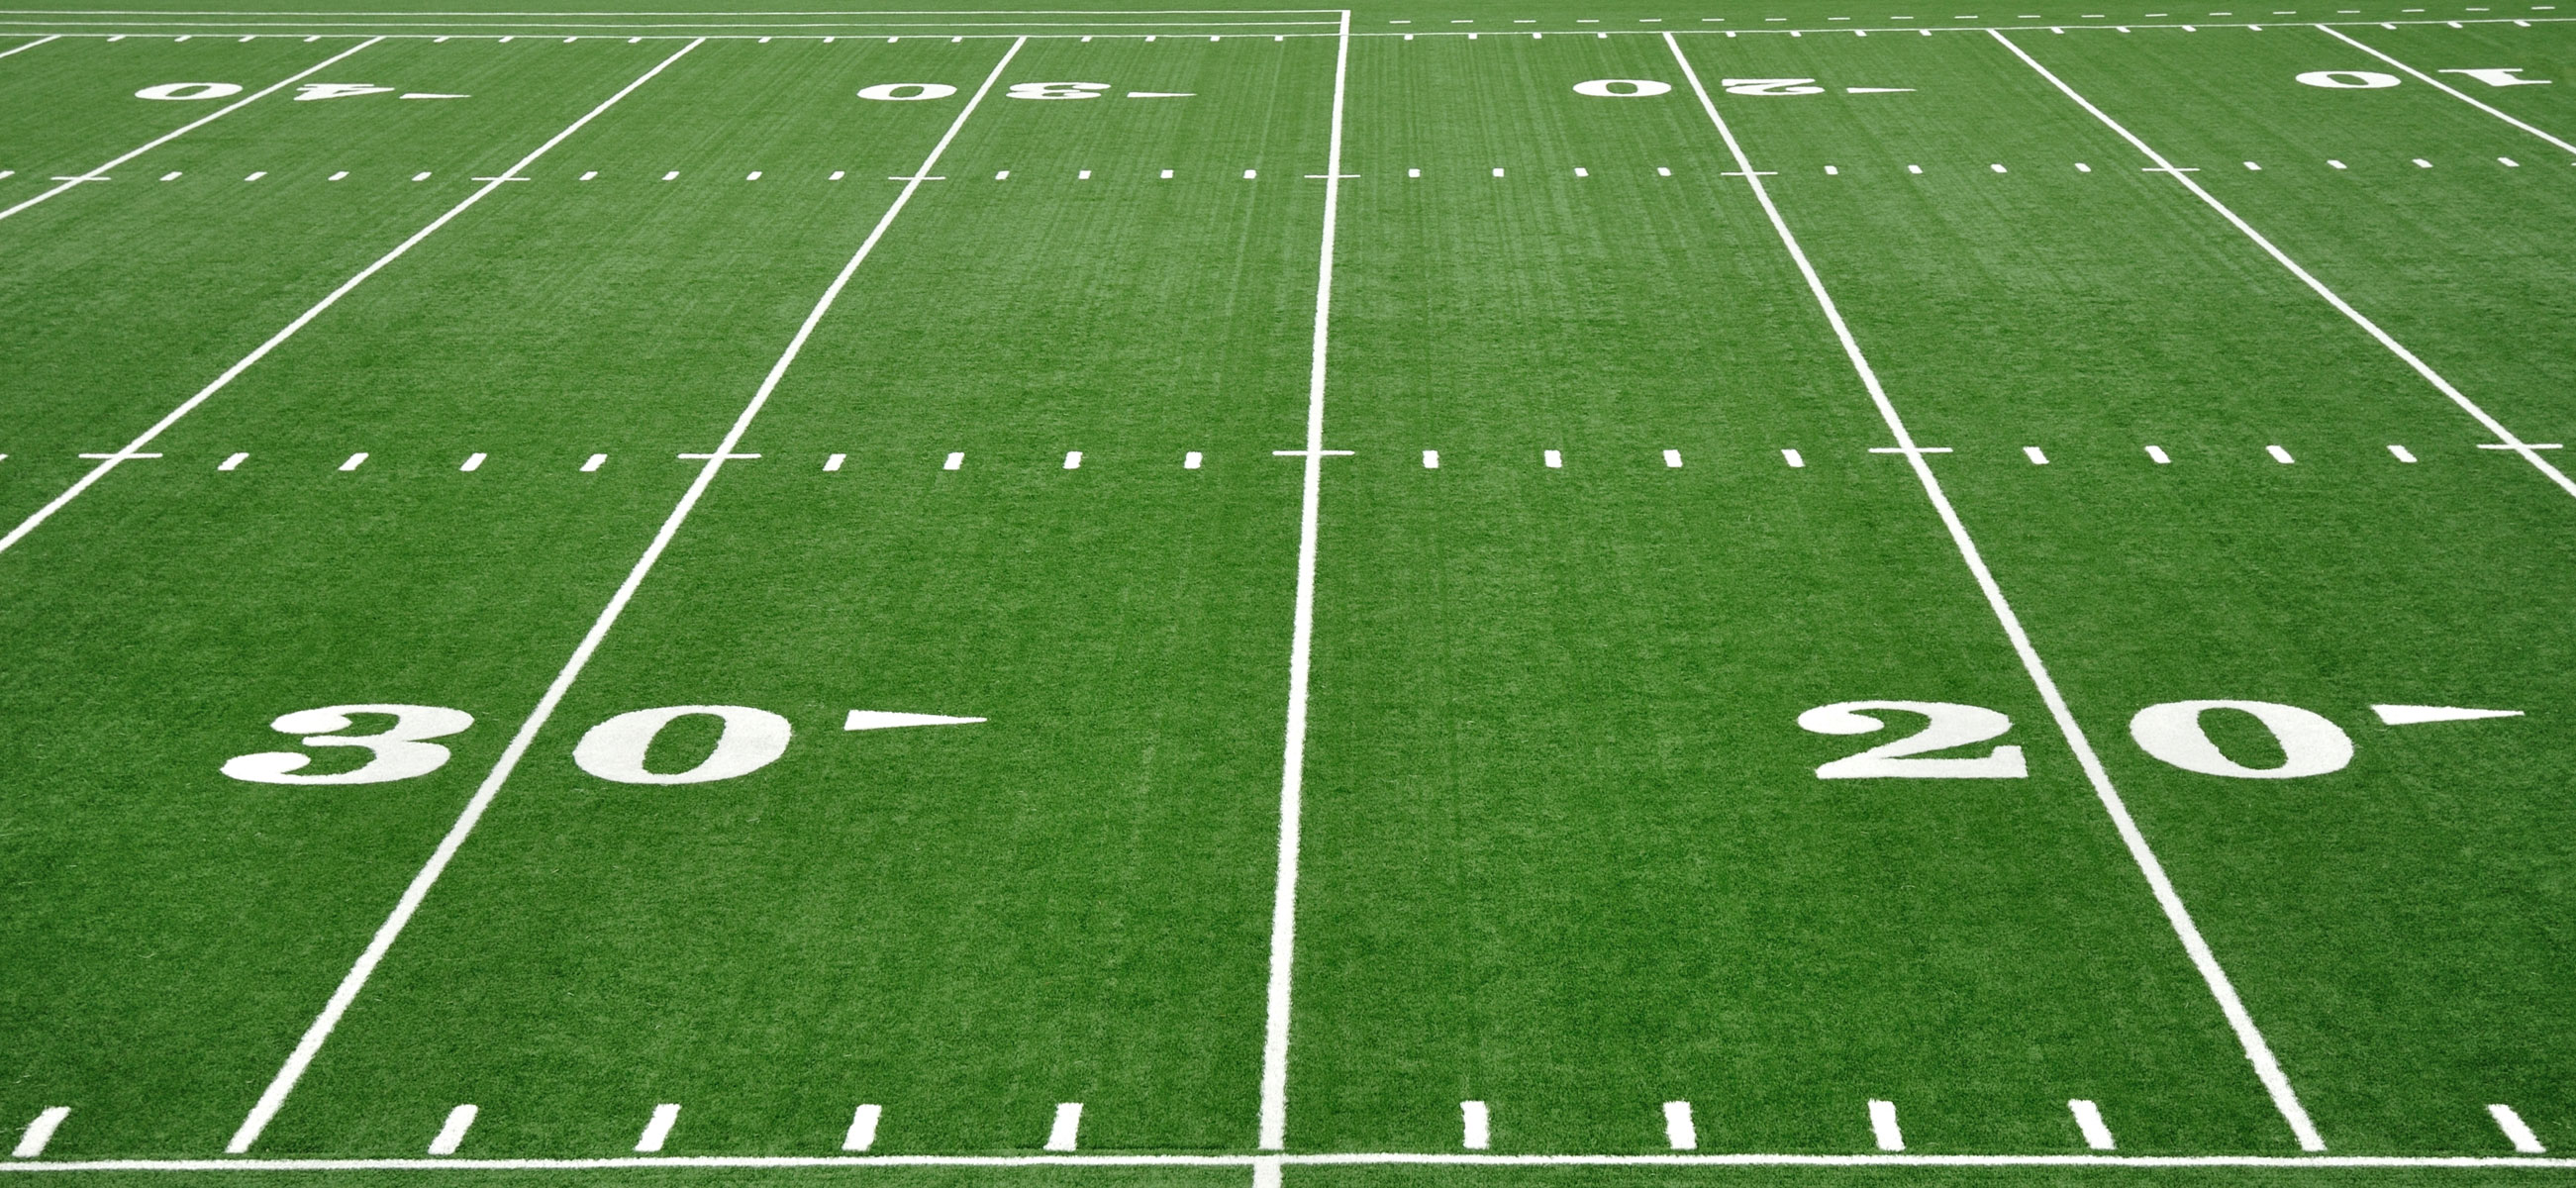 Best Photos Of Football Field Football Field Lines Uefa Quality Backgrounds For Powerpoint Templates Ppt Backgrounds